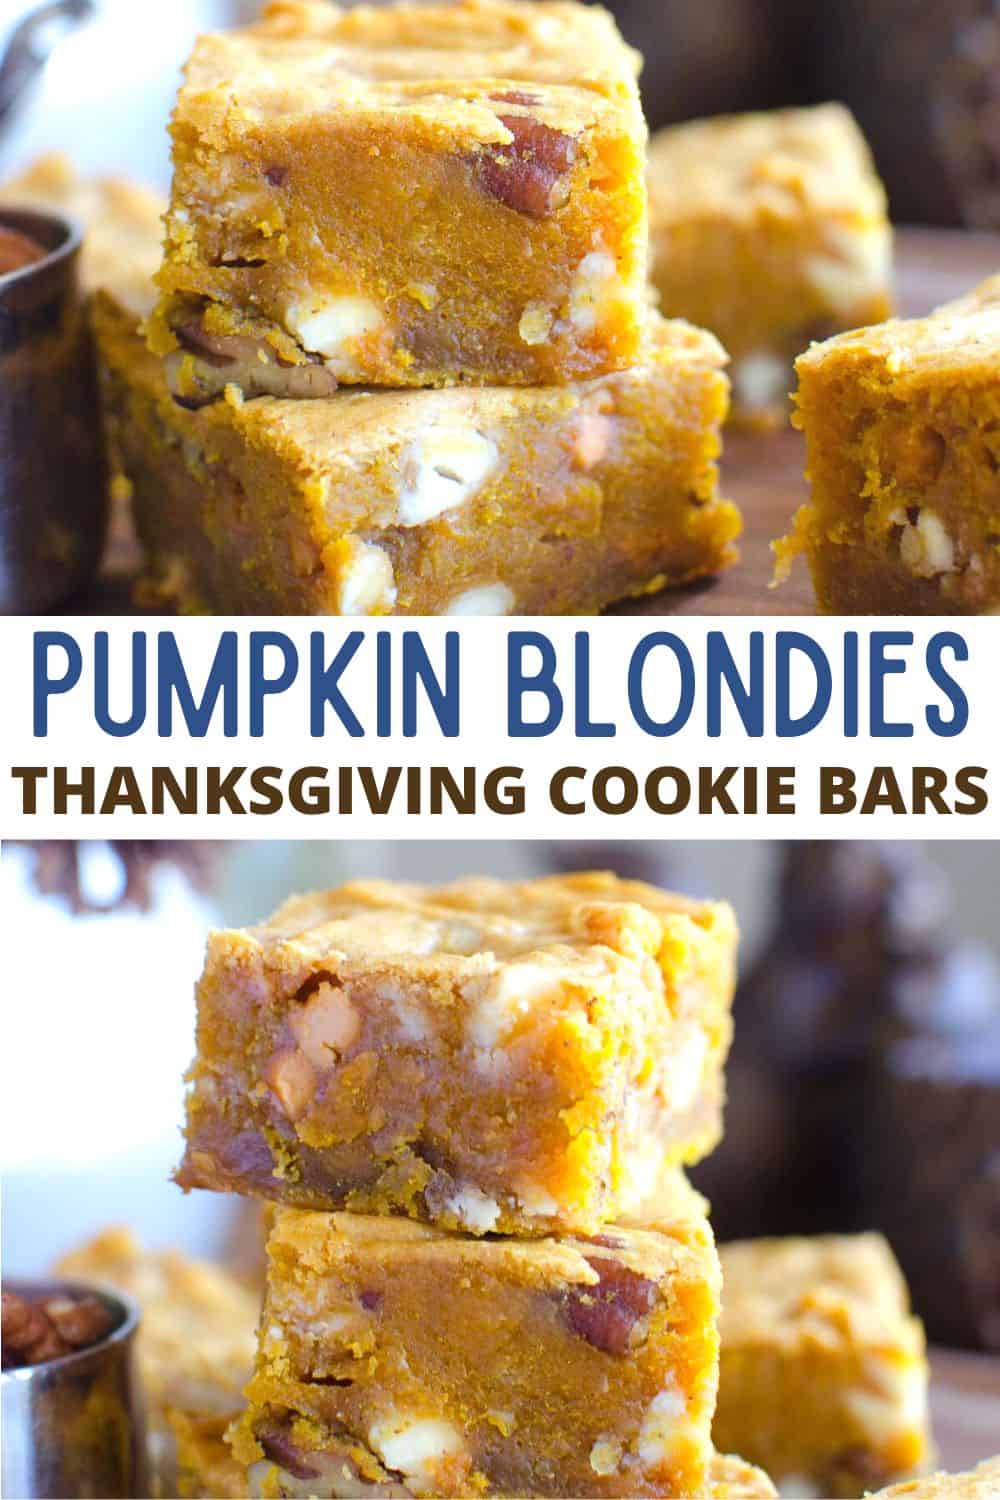 These pumpkin blondies are loaded with rich flavors of fall and a thick gooey texture. These cookie bars are packed with white chocolate chips, butterscotch chips and pecans.